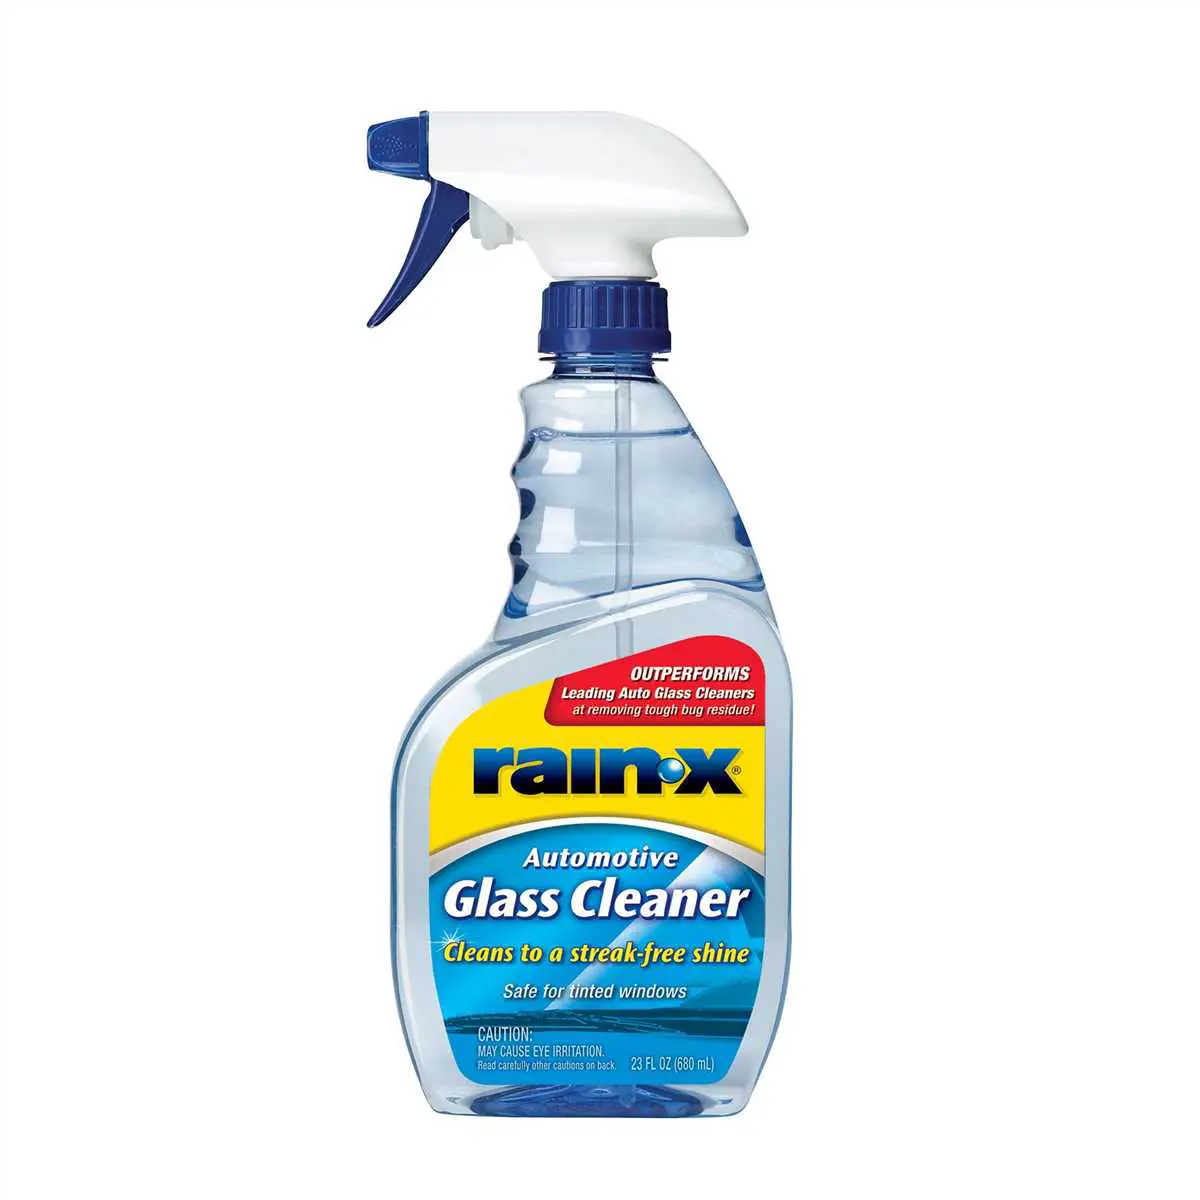 Can you use glass cleaner on tinted windows